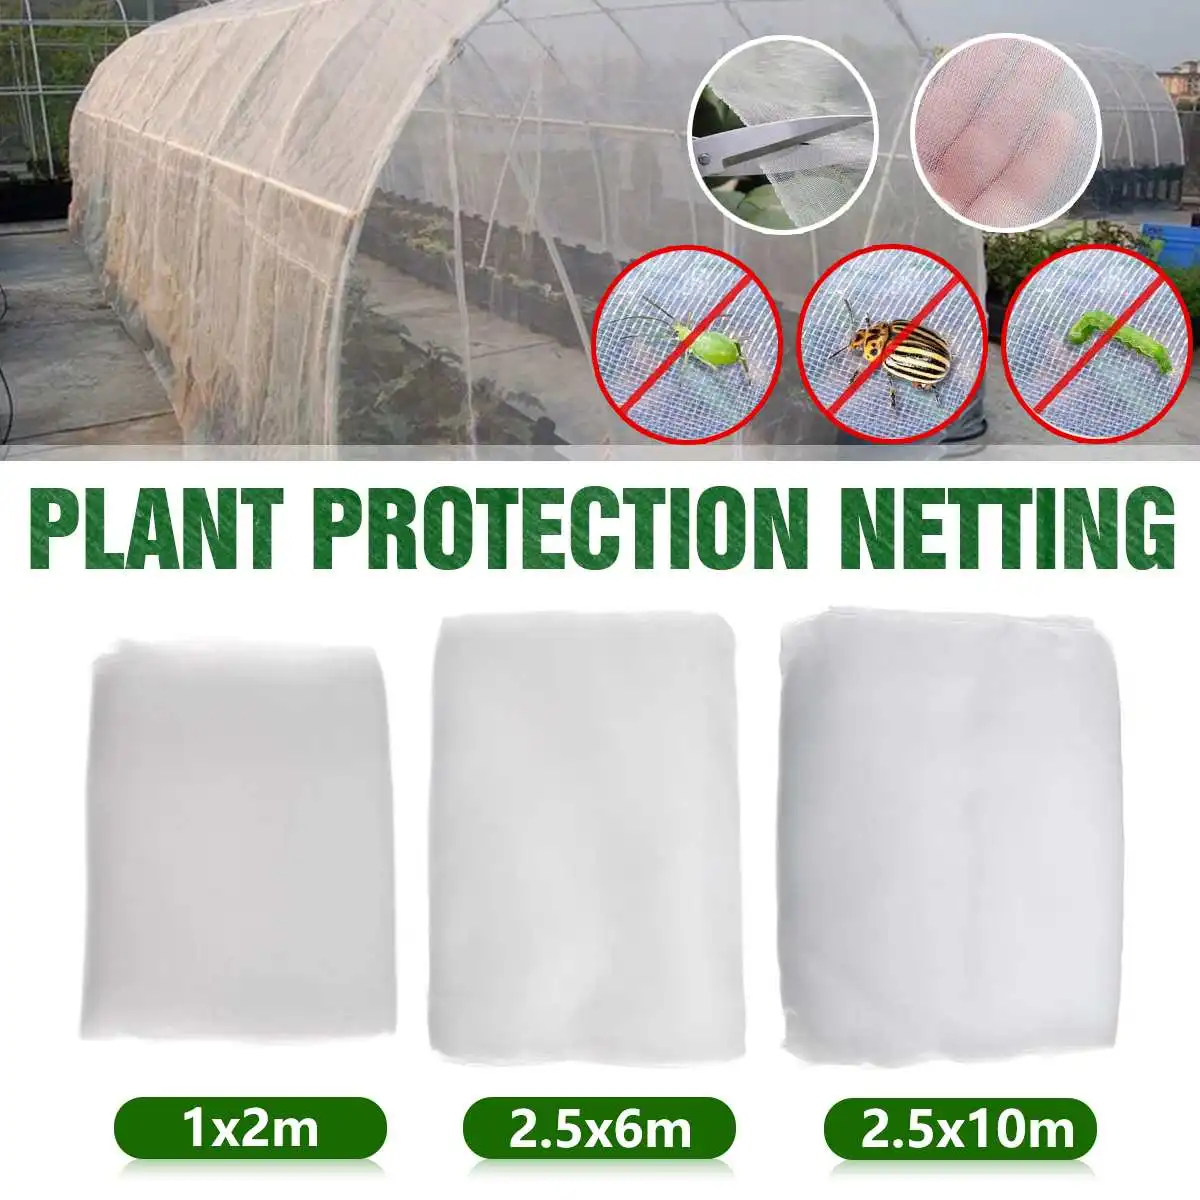 Insect Protection Net Bug Insect Bird Net Barrier Vegetables Fruits Flowers Plant Protection Greenhouse Garden Netting Summer